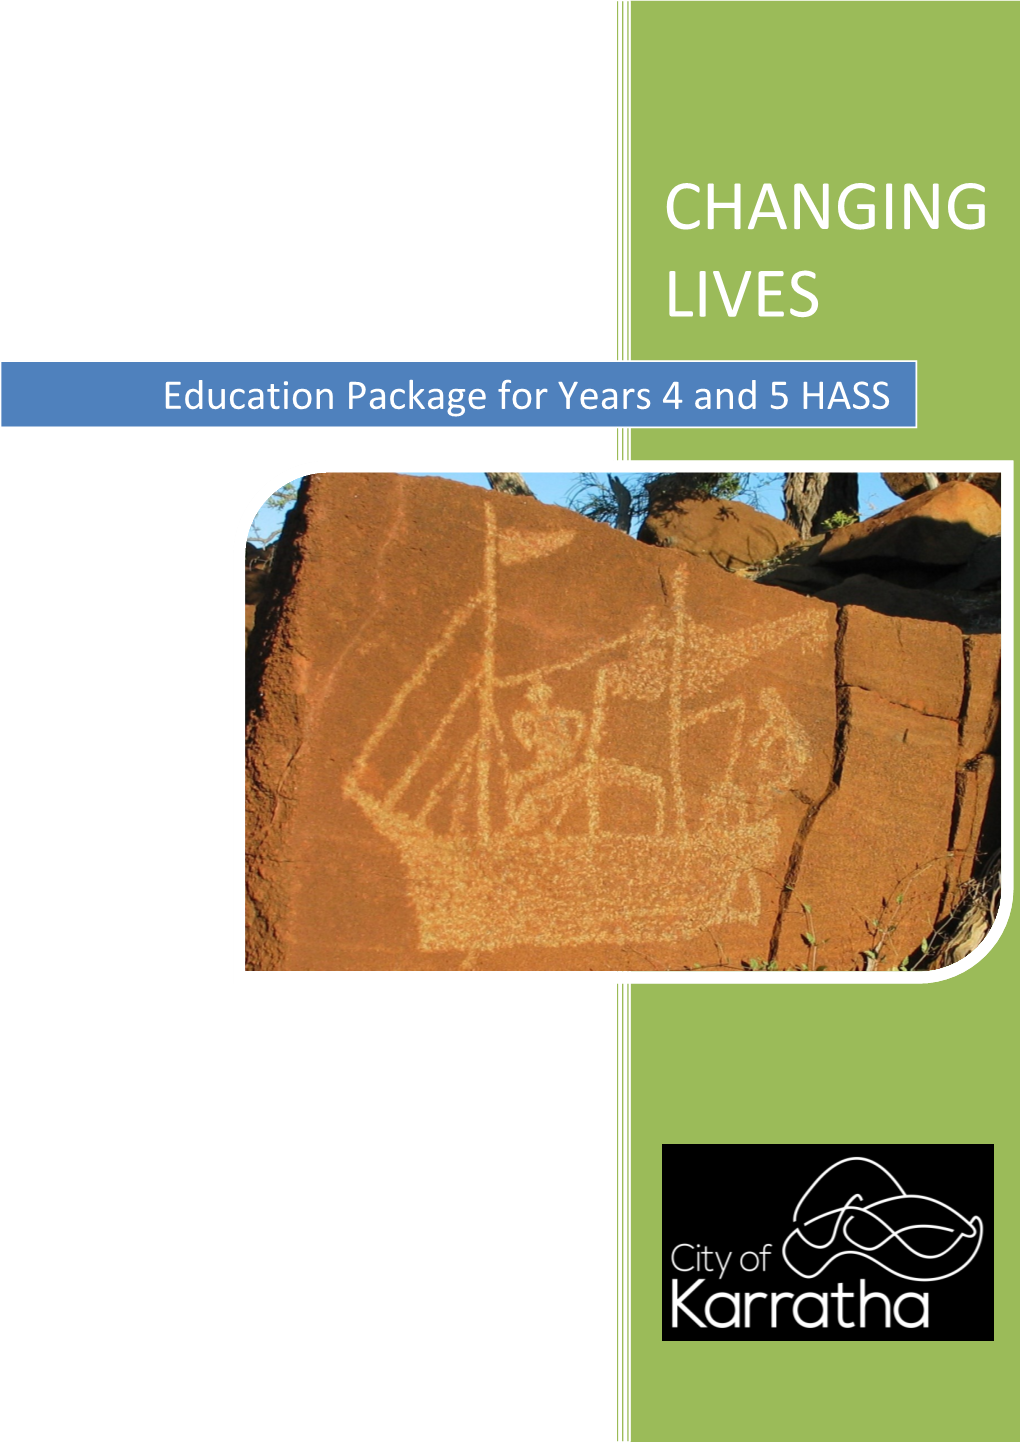 Education Package for Years 4 and 5 HASS